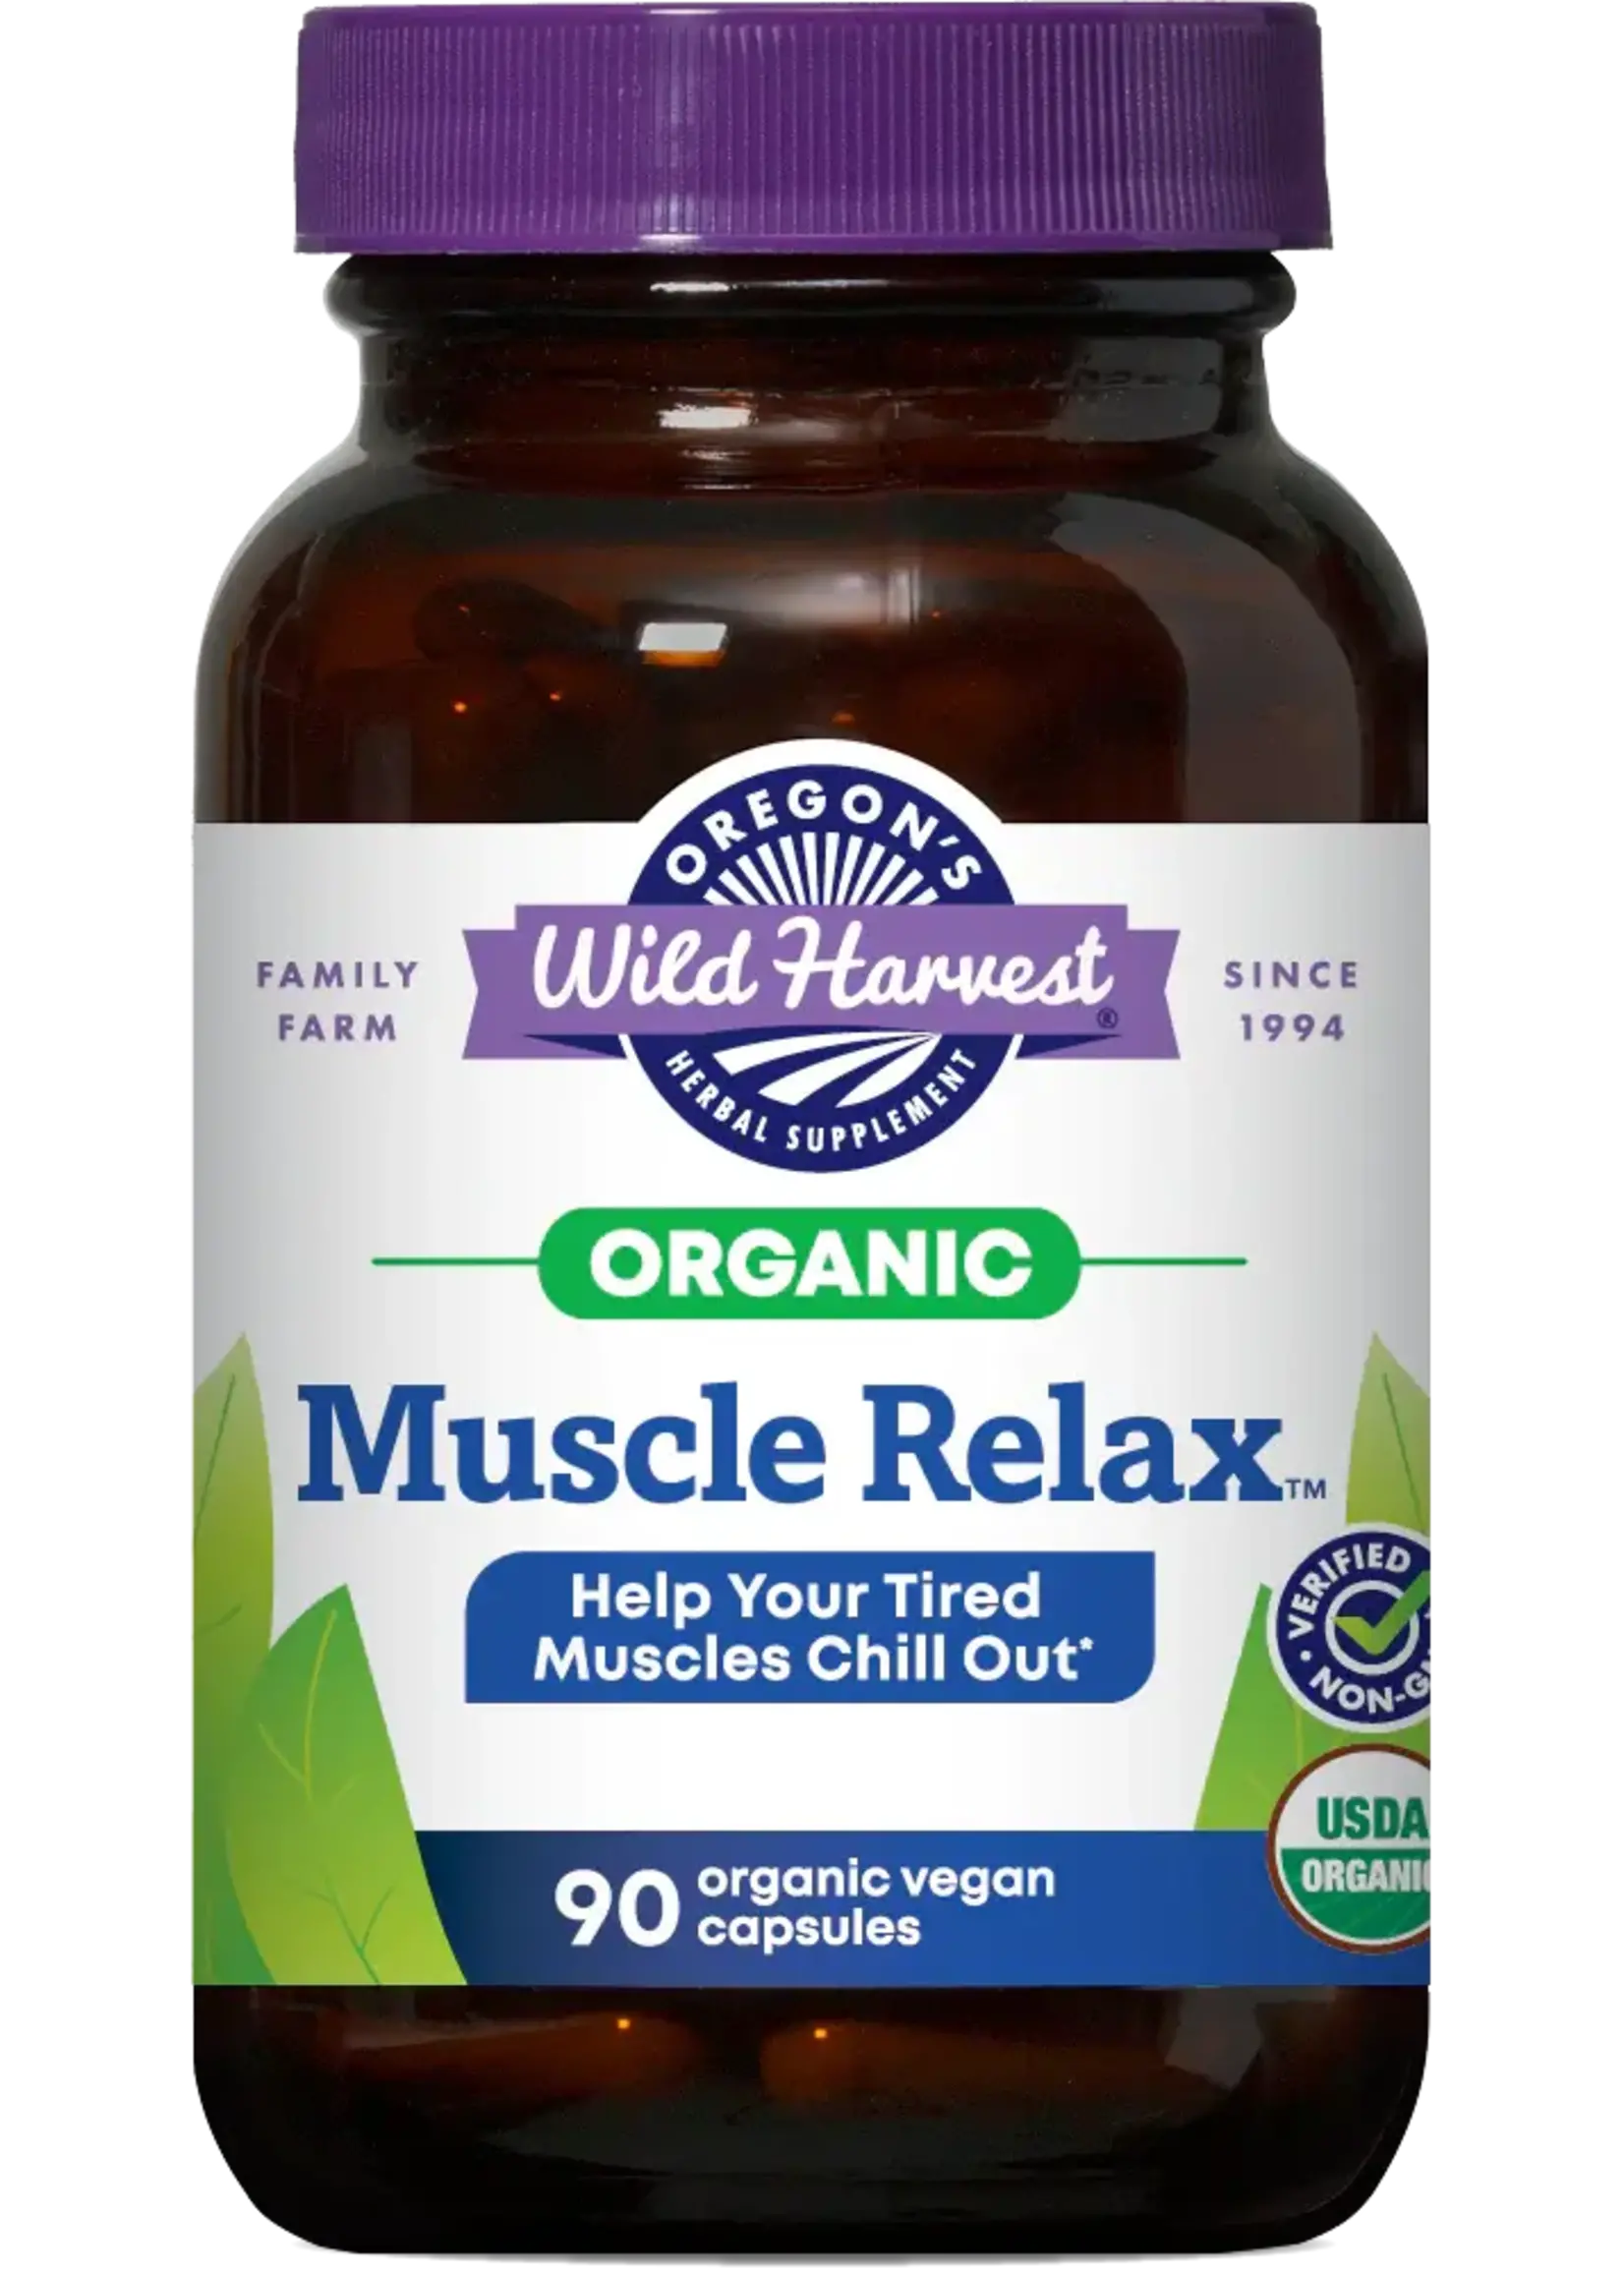 Oregon's Wild Harvest (OWH) Muscle Relax 90ct